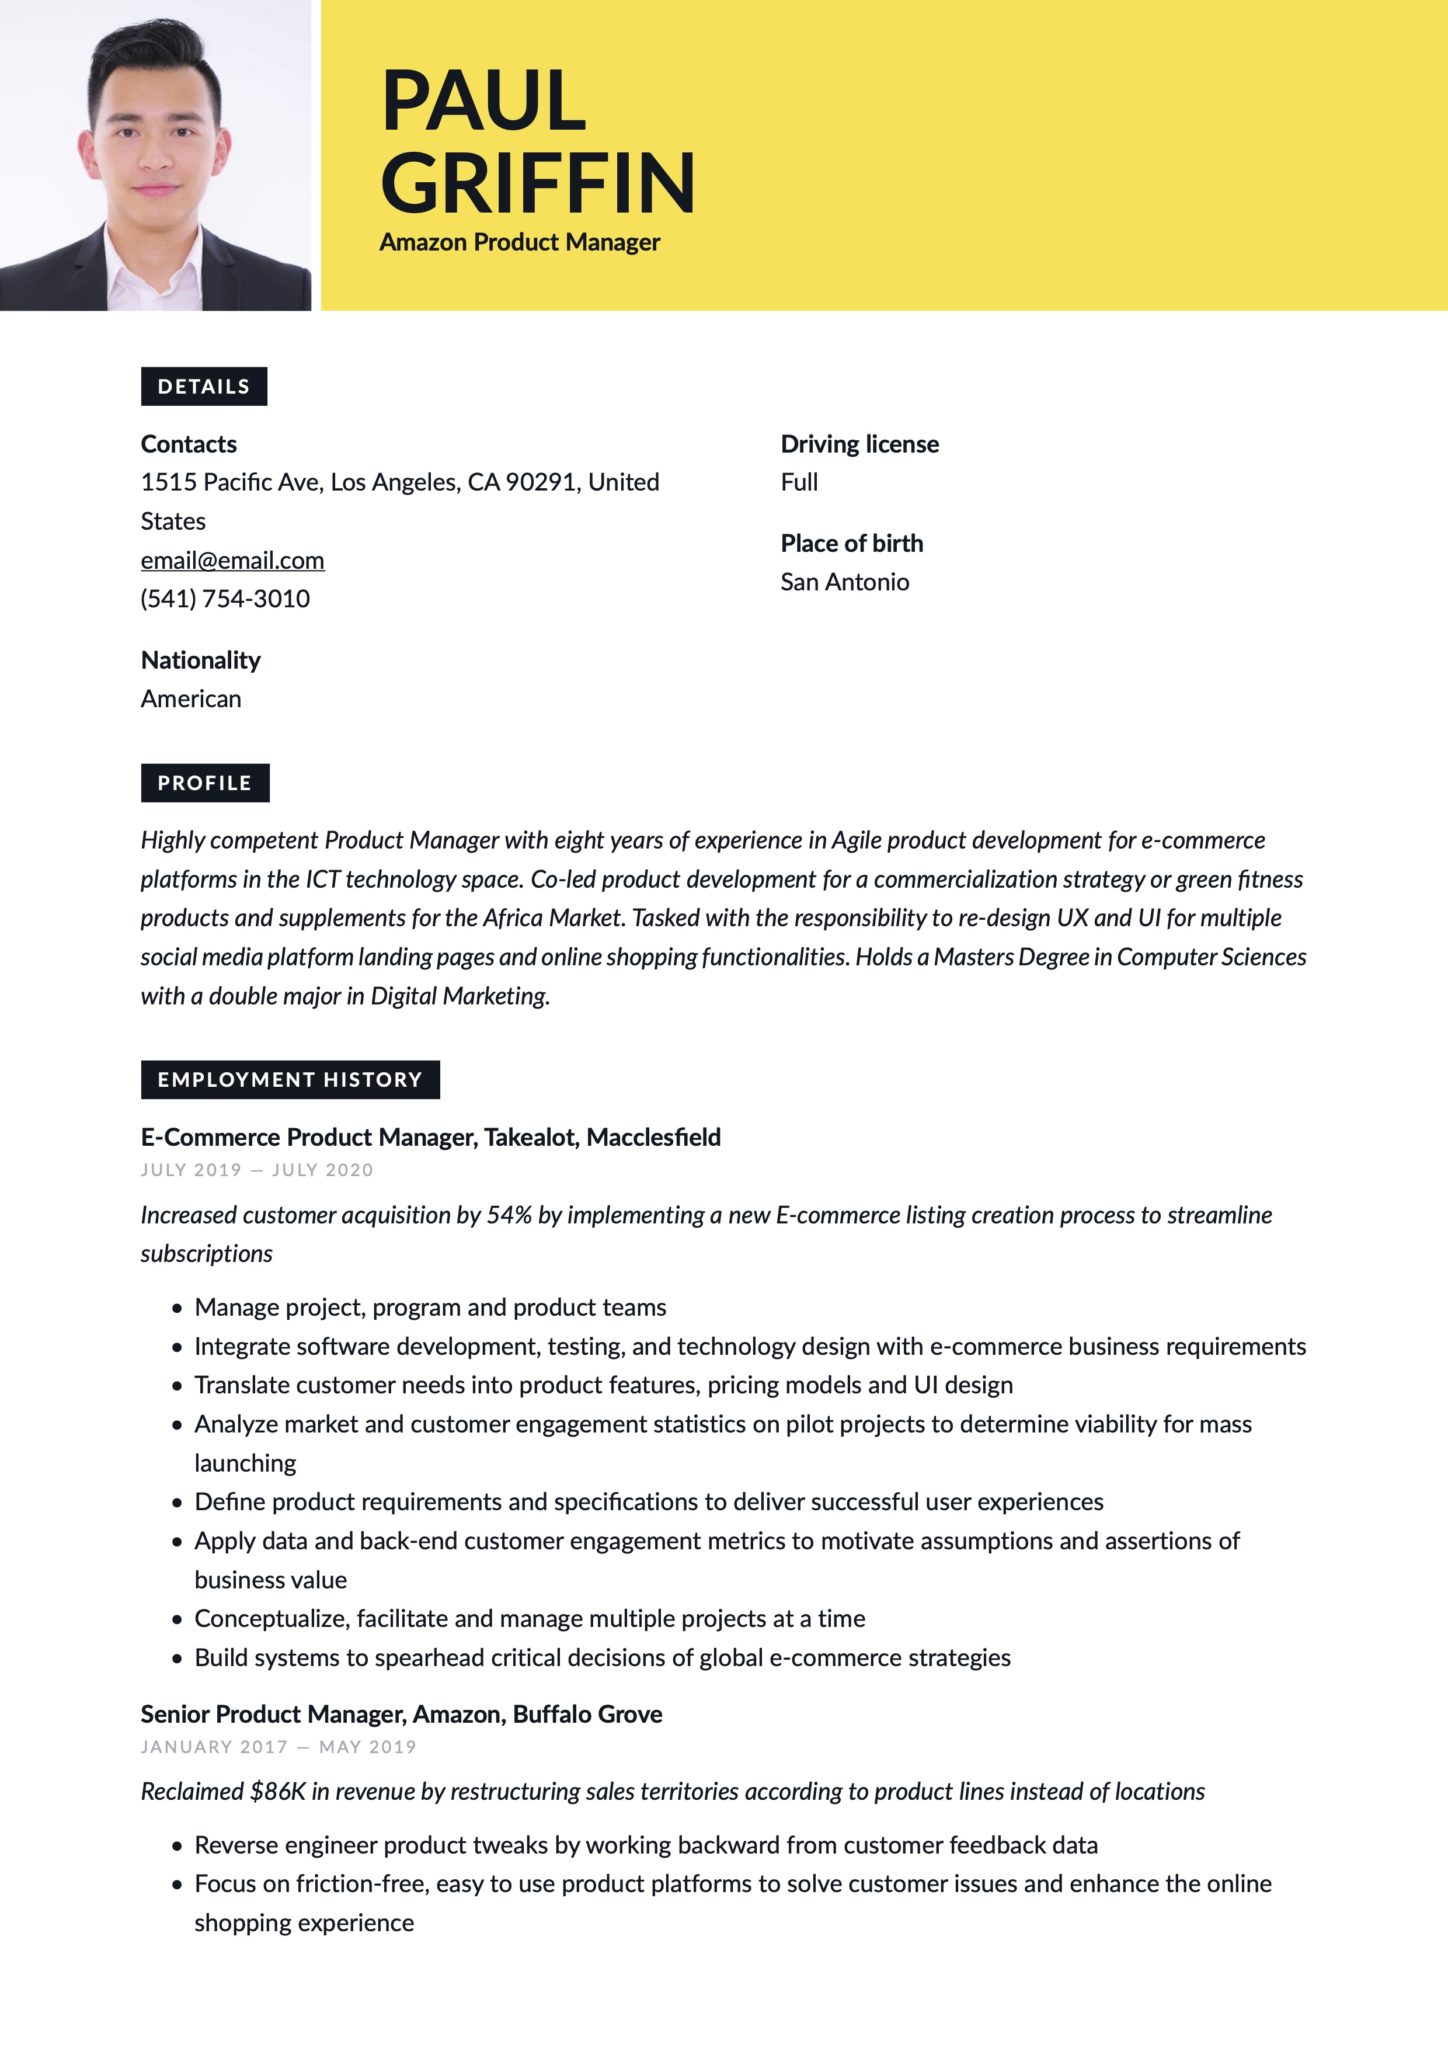 Creative Yellow Resume Template Amazon Product Manager